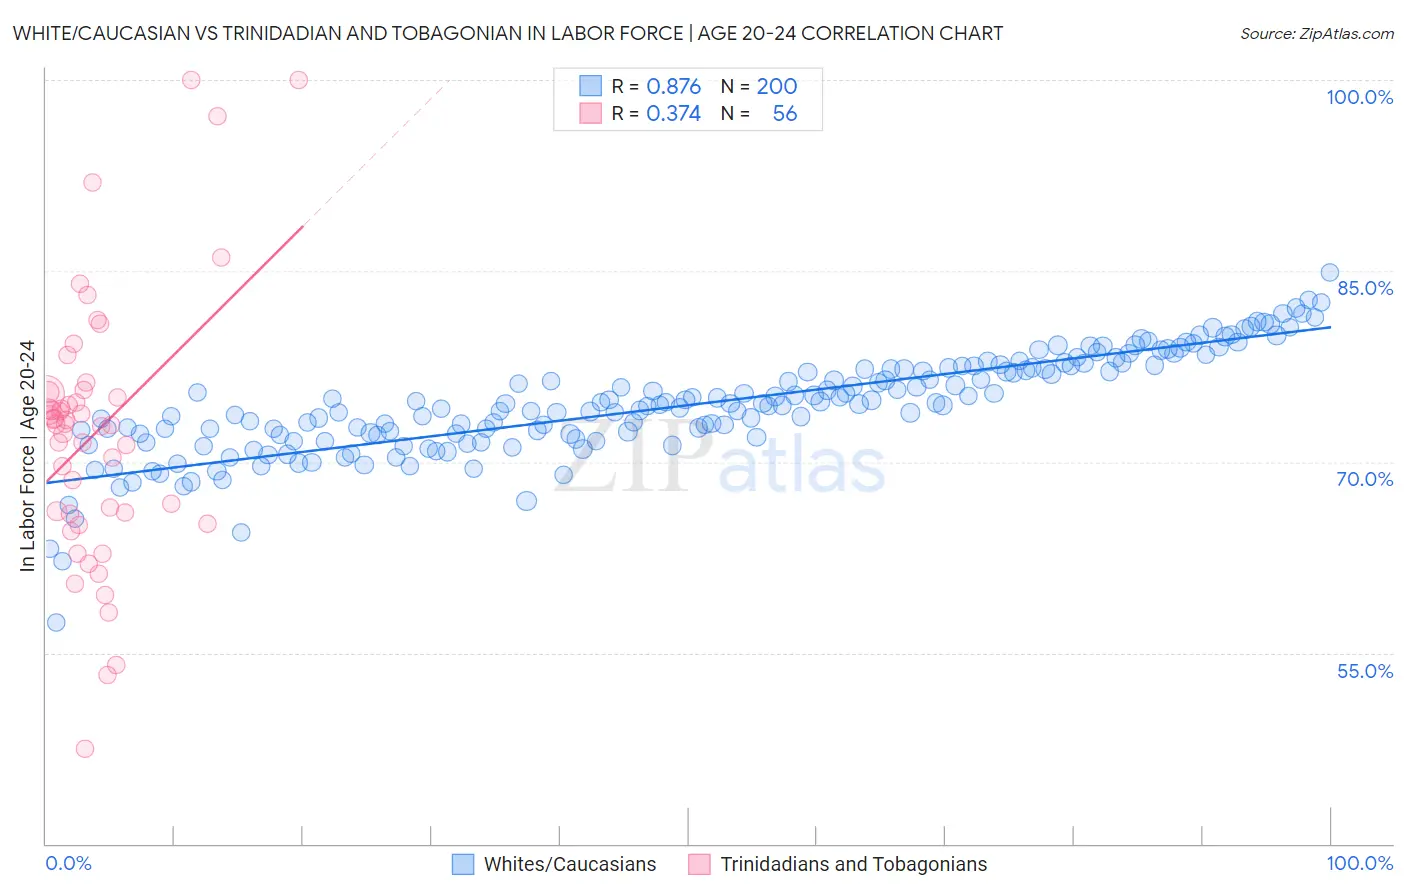 White/Caucasian vs Trinidadian and Tobagonian In Labor Force | Age 20-24